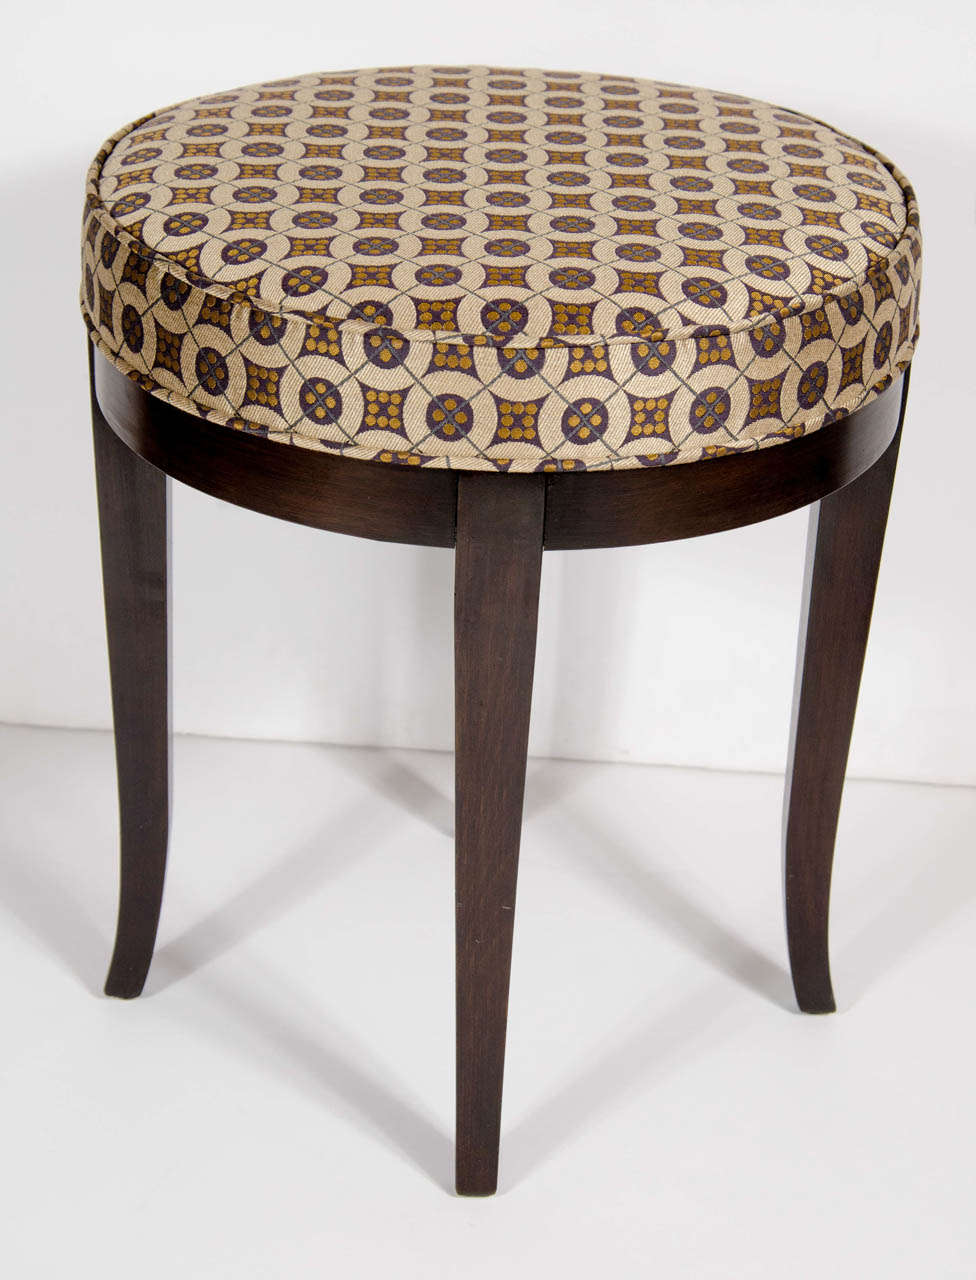 This Art Deco stool features a round upholstered seat in a Klimt inspired fabric with geometric design in amber, charcoal and bisque tones. It has out-turned saber legs made of ebonized walnut. This stool has been newly reupholstered and mint